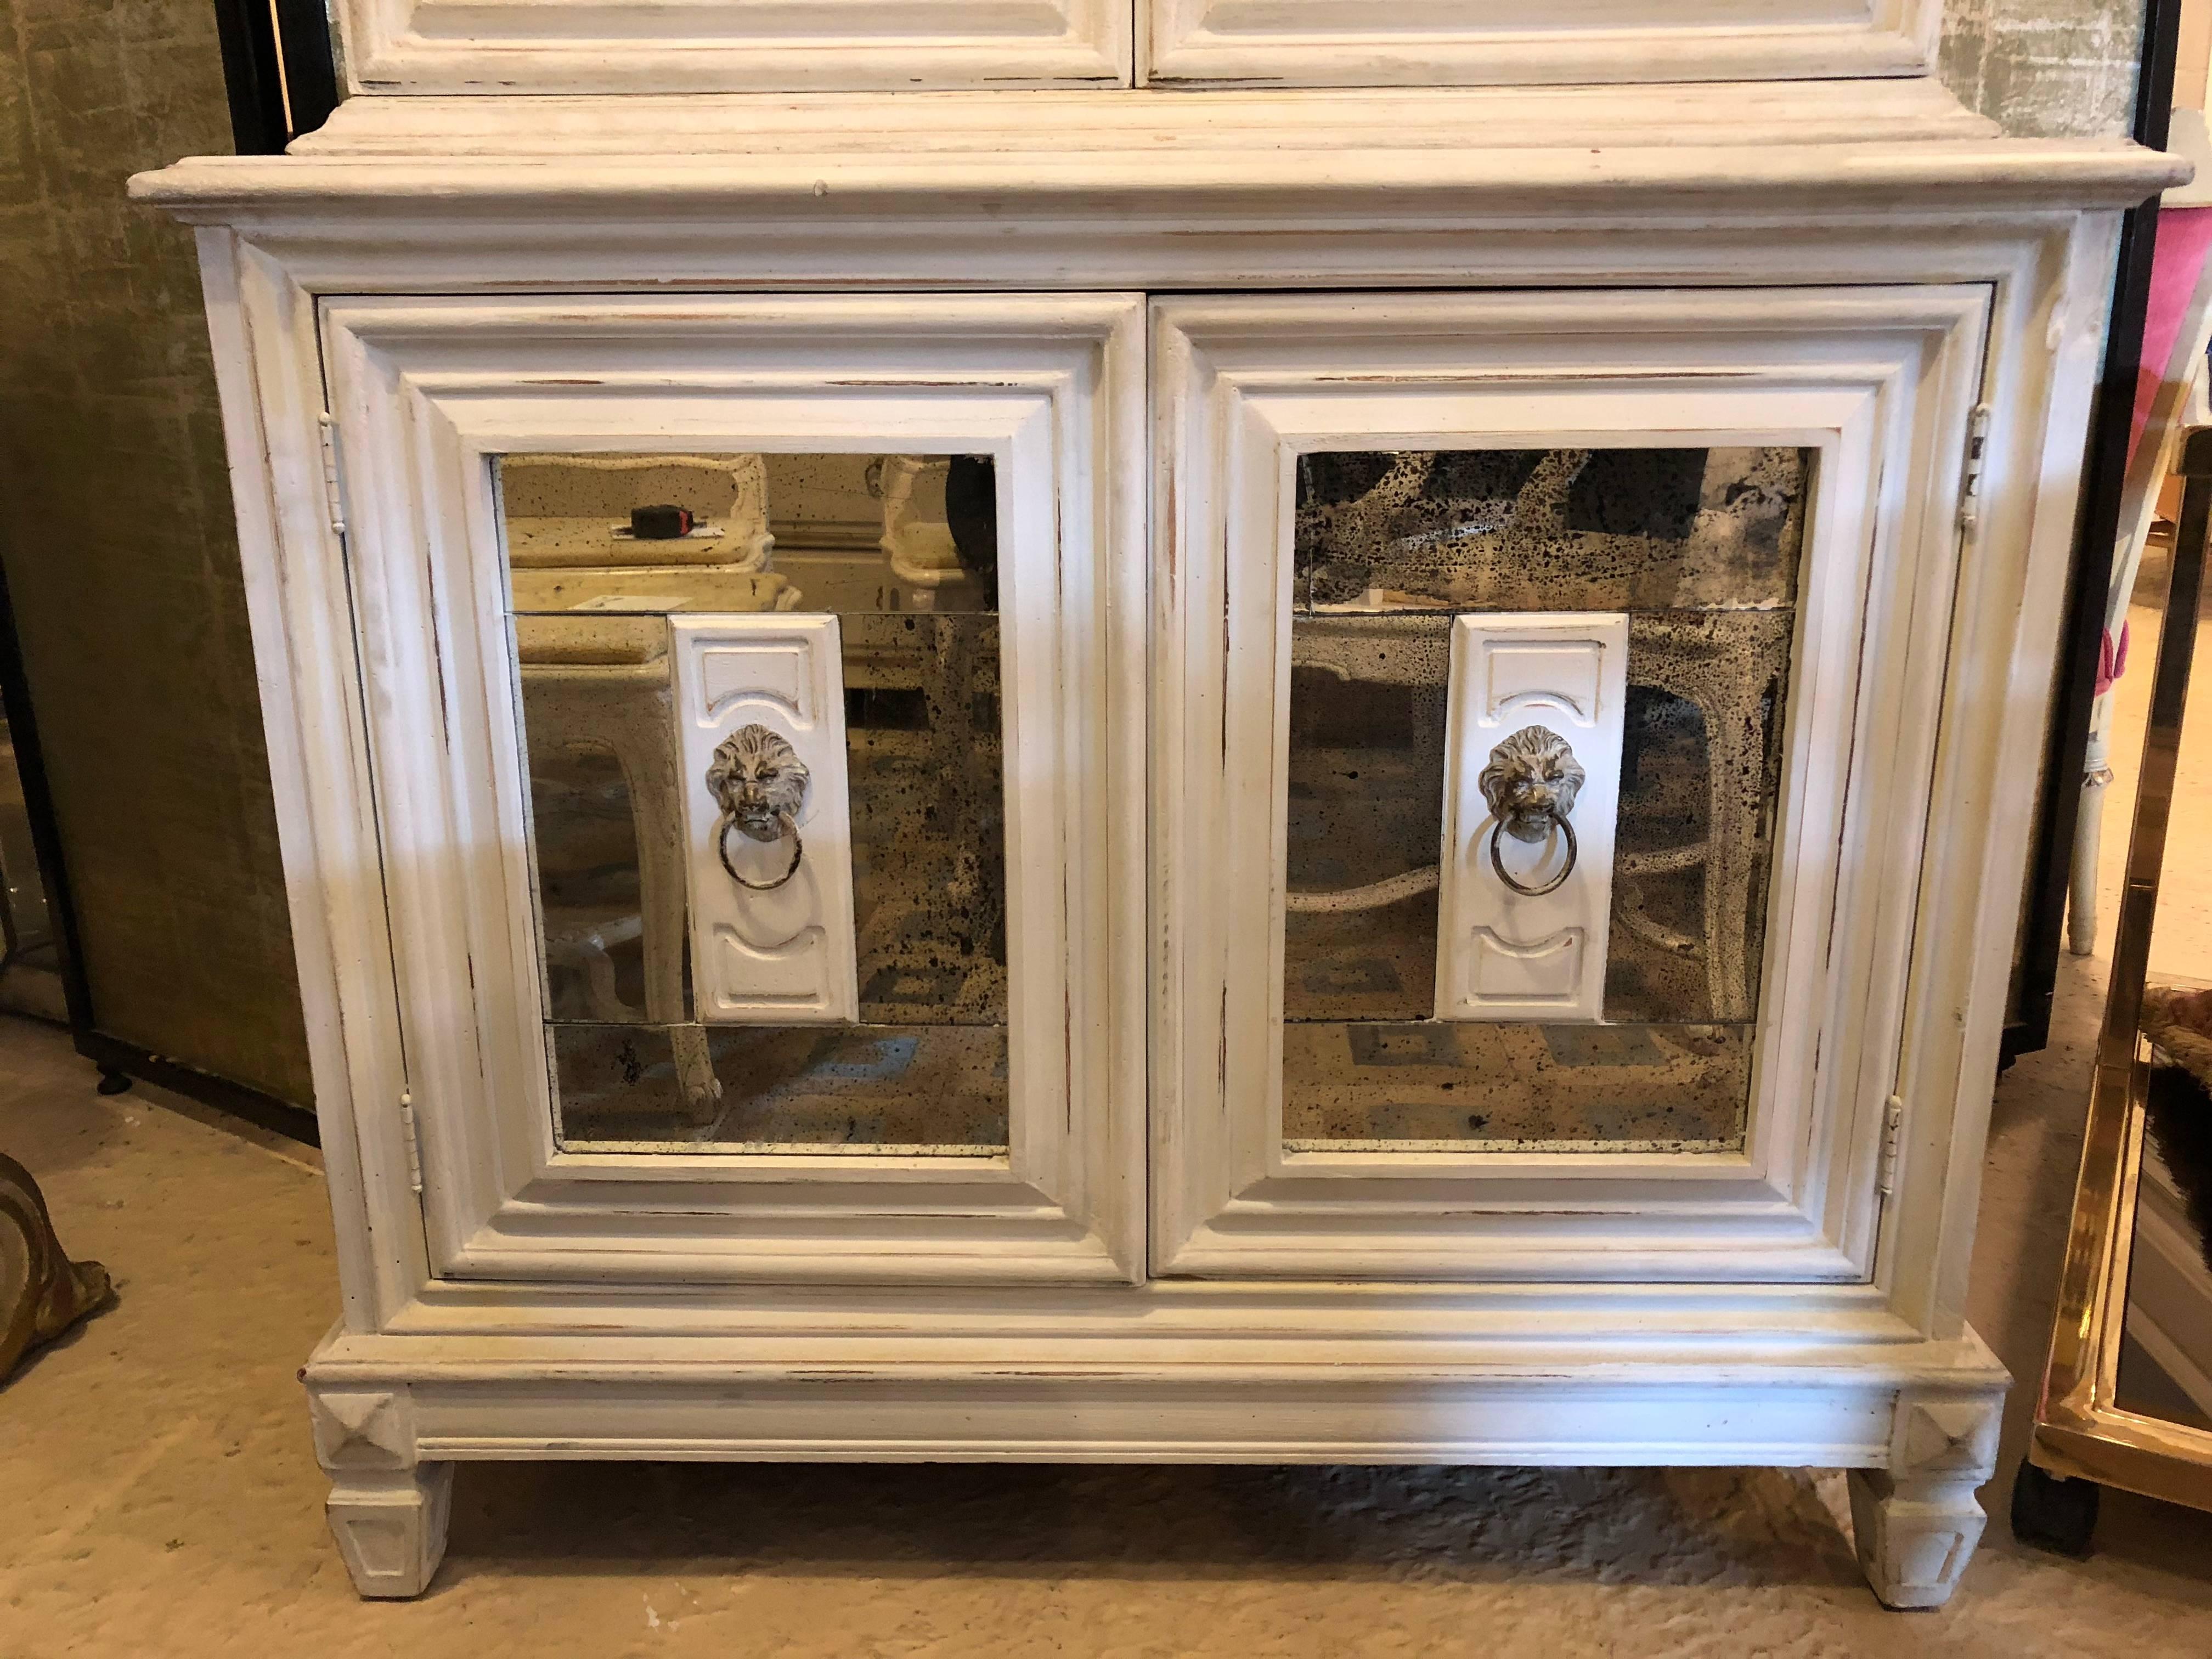 20th Century Swedish Style Distressed Paint Decorated Cabinet Having a Mirrored Bottom